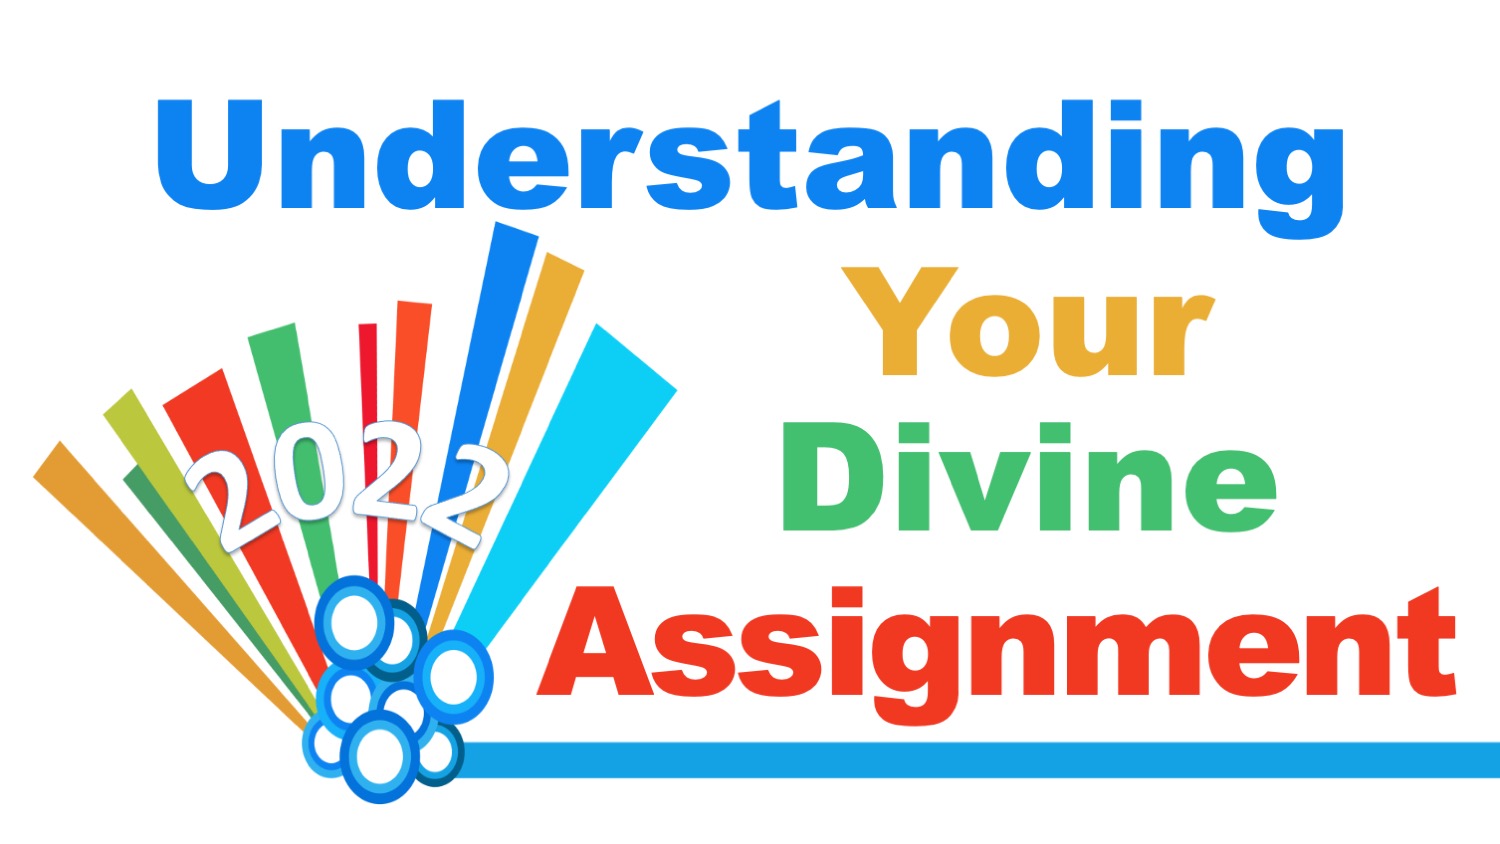 what is your divine assignment